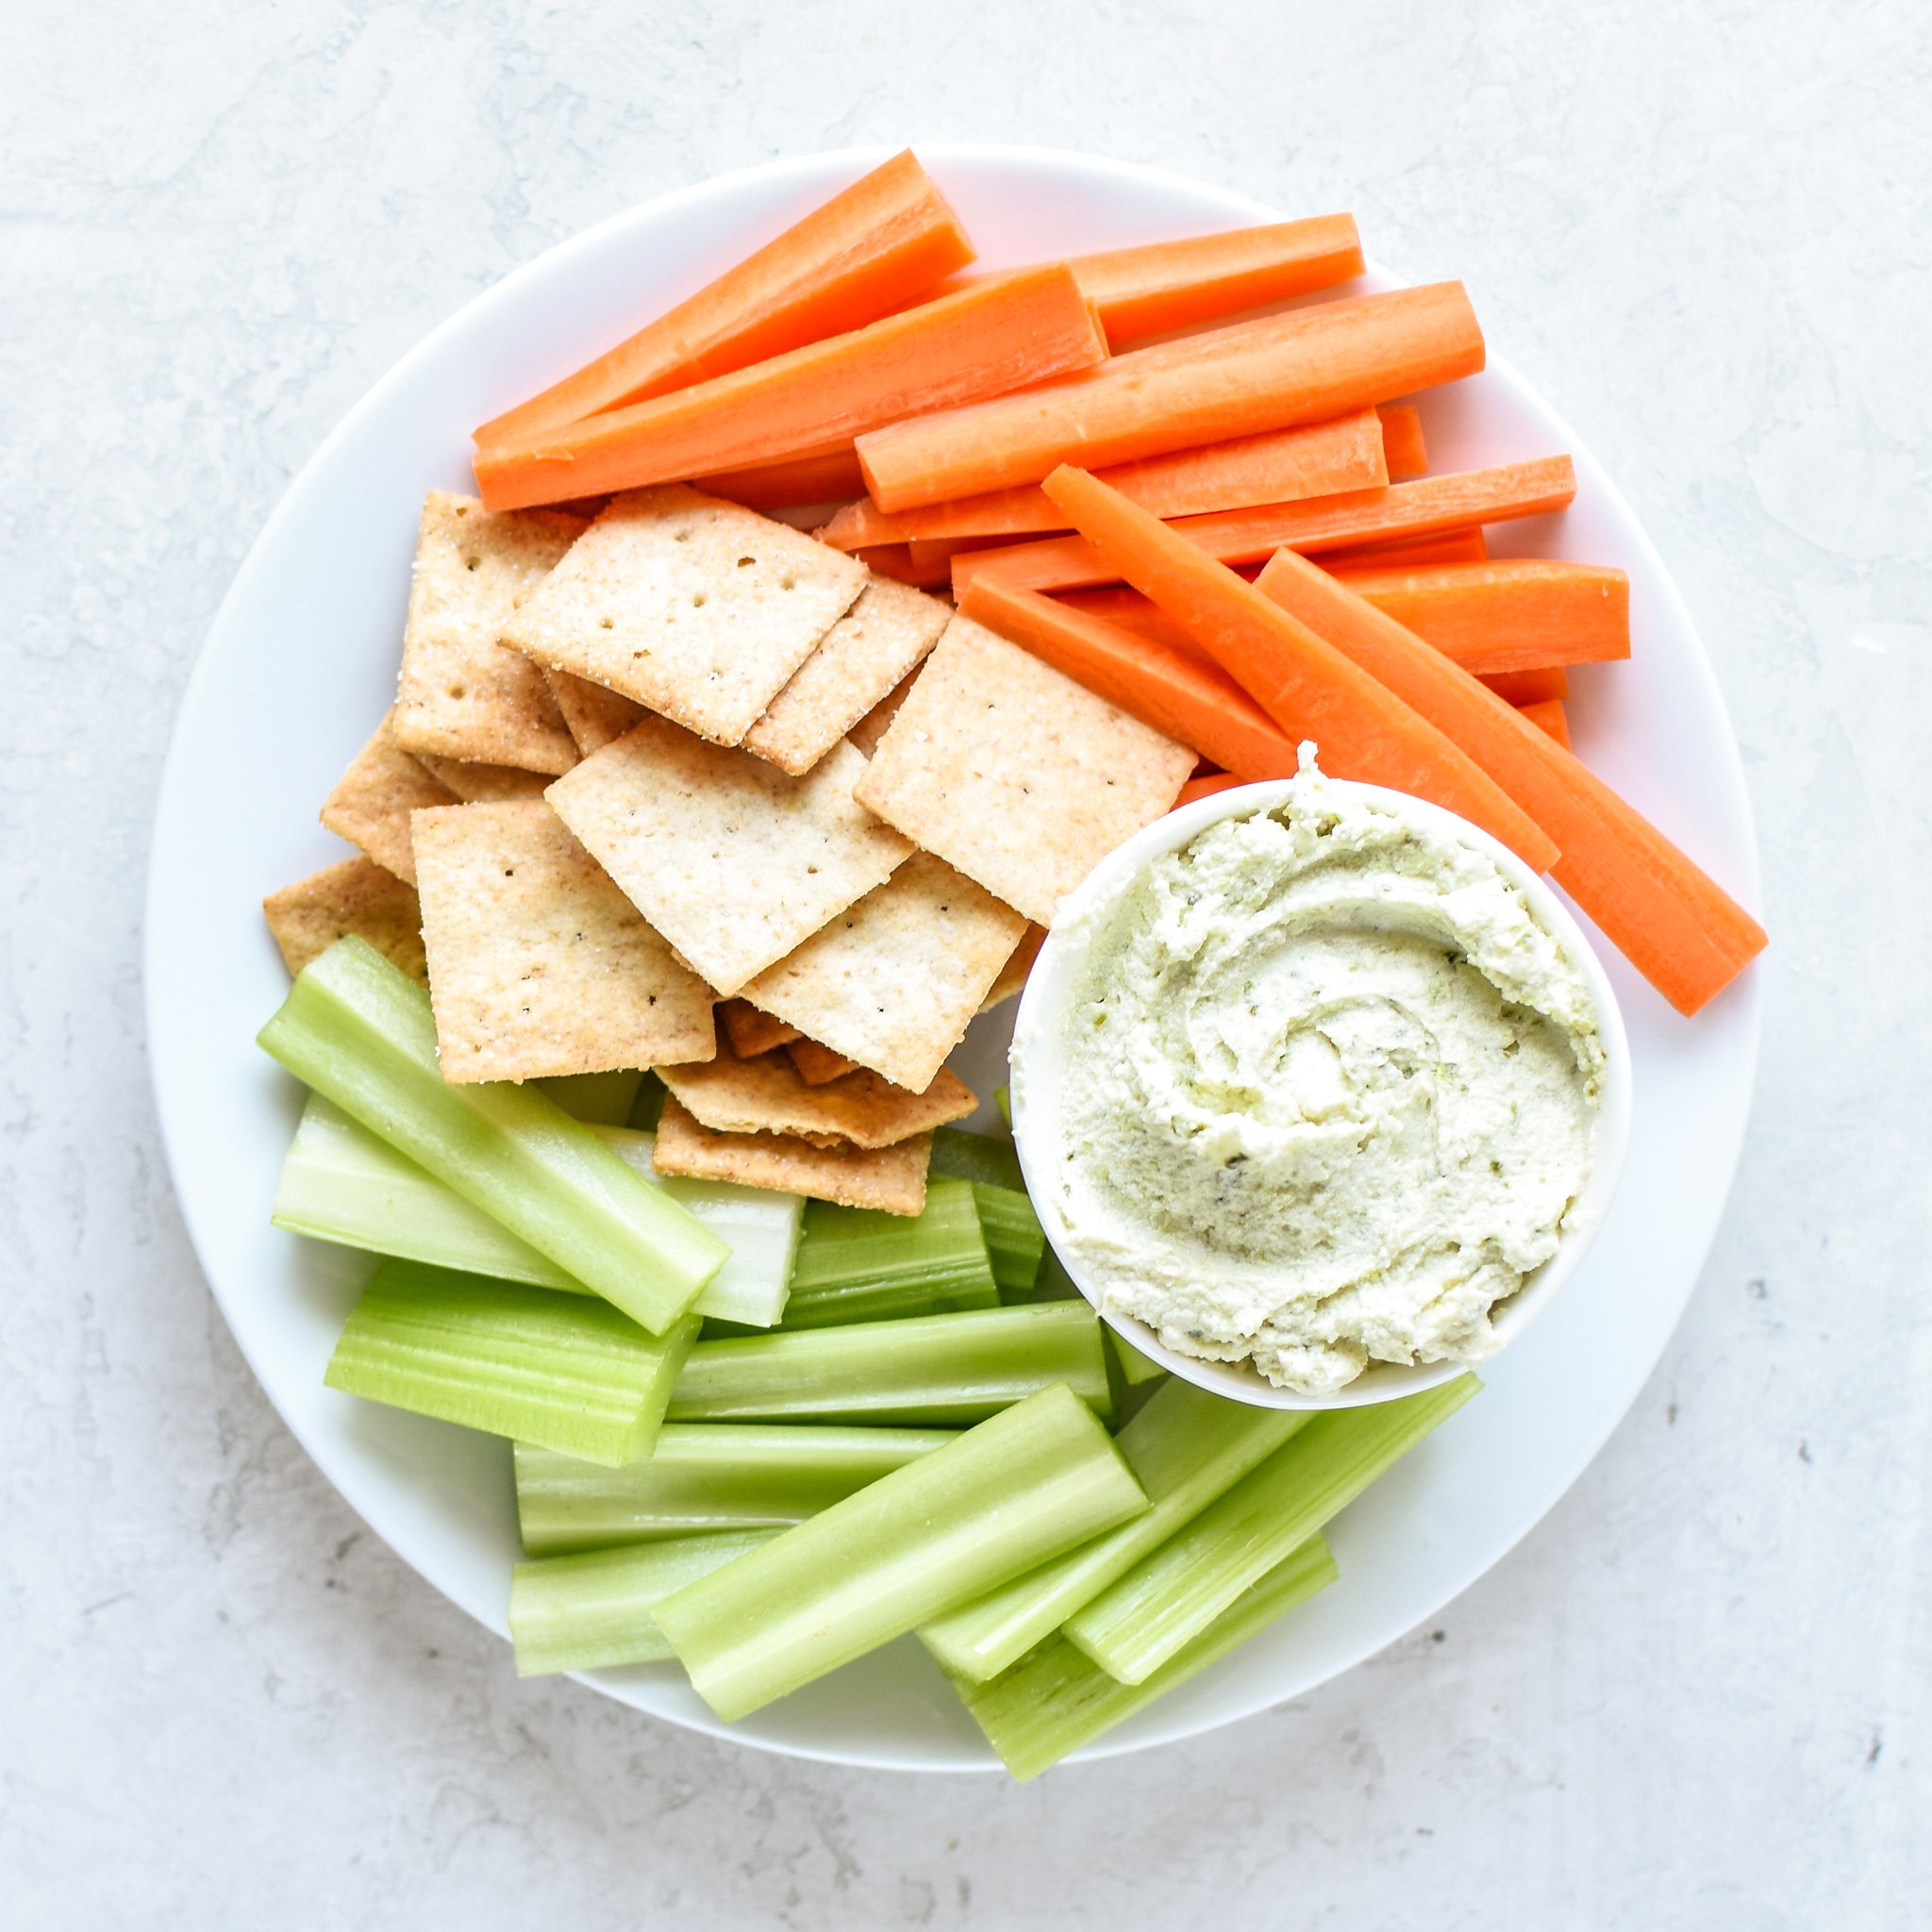 A bowl of 3 Ingredient Pesto Goat Cheese Dip with carrots, crackers and celery.